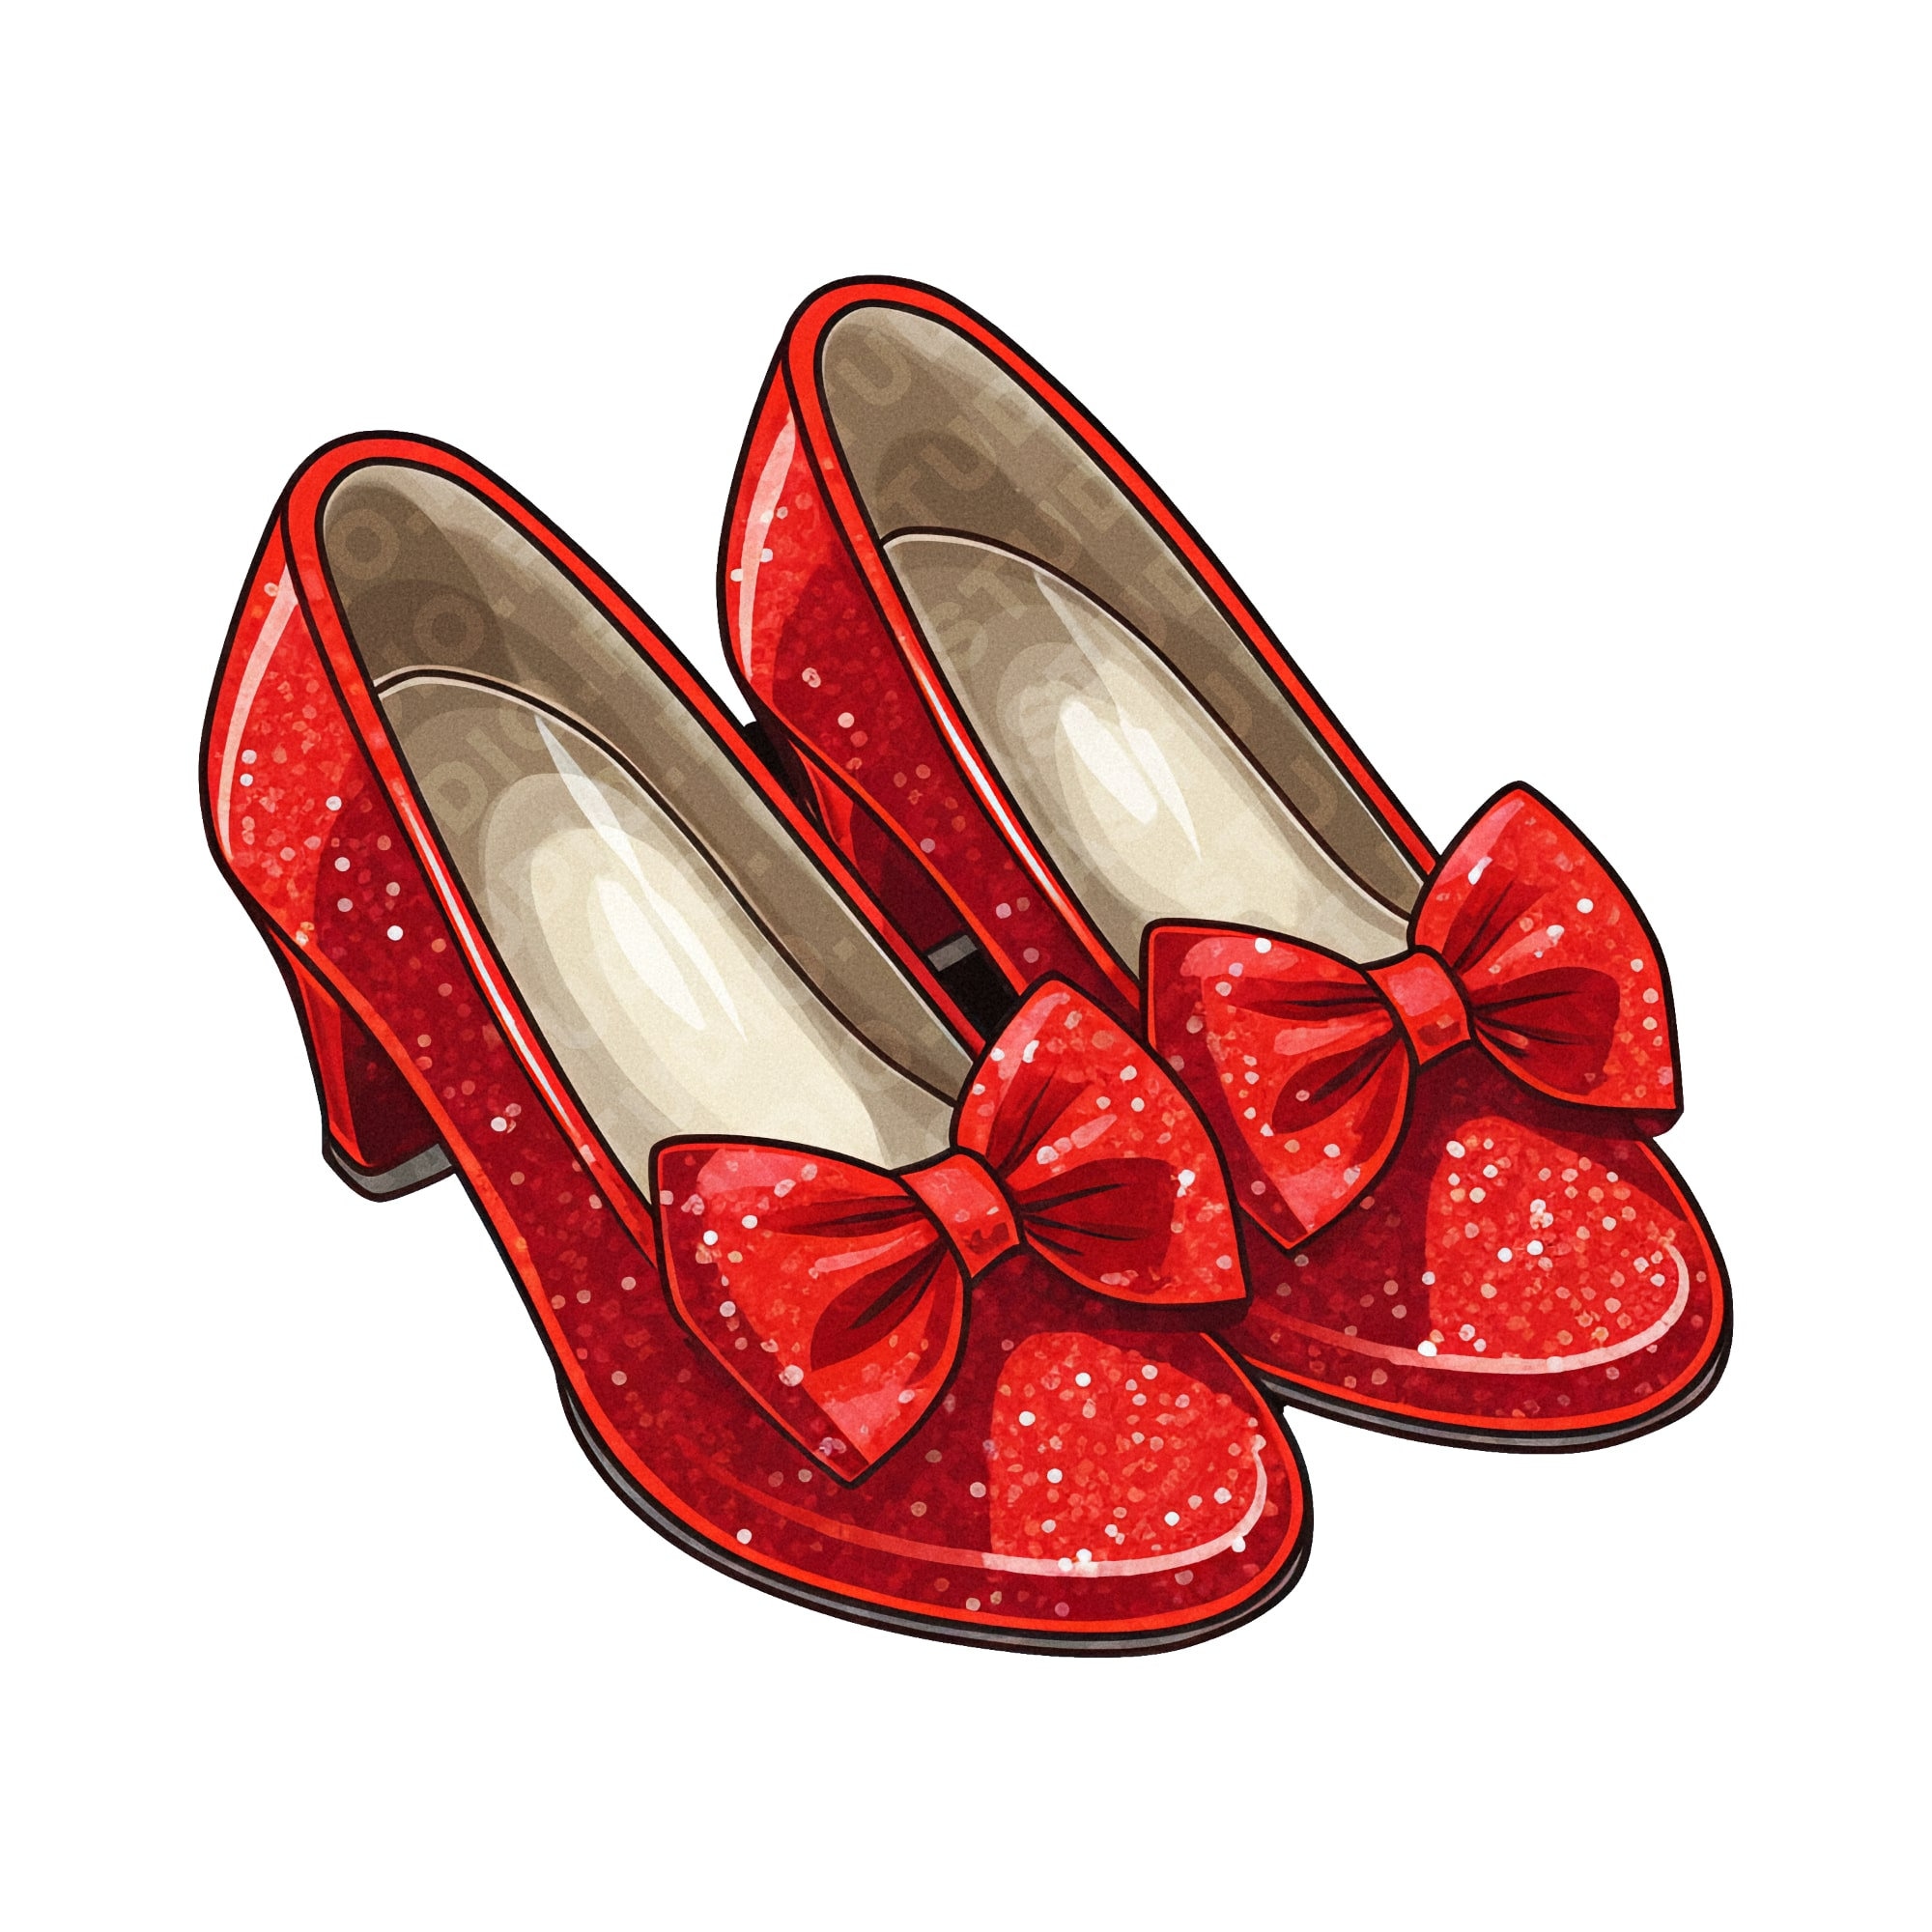 Ruby Slippers Transparent PNG Clipart for Sticker Design Asset - Etsy